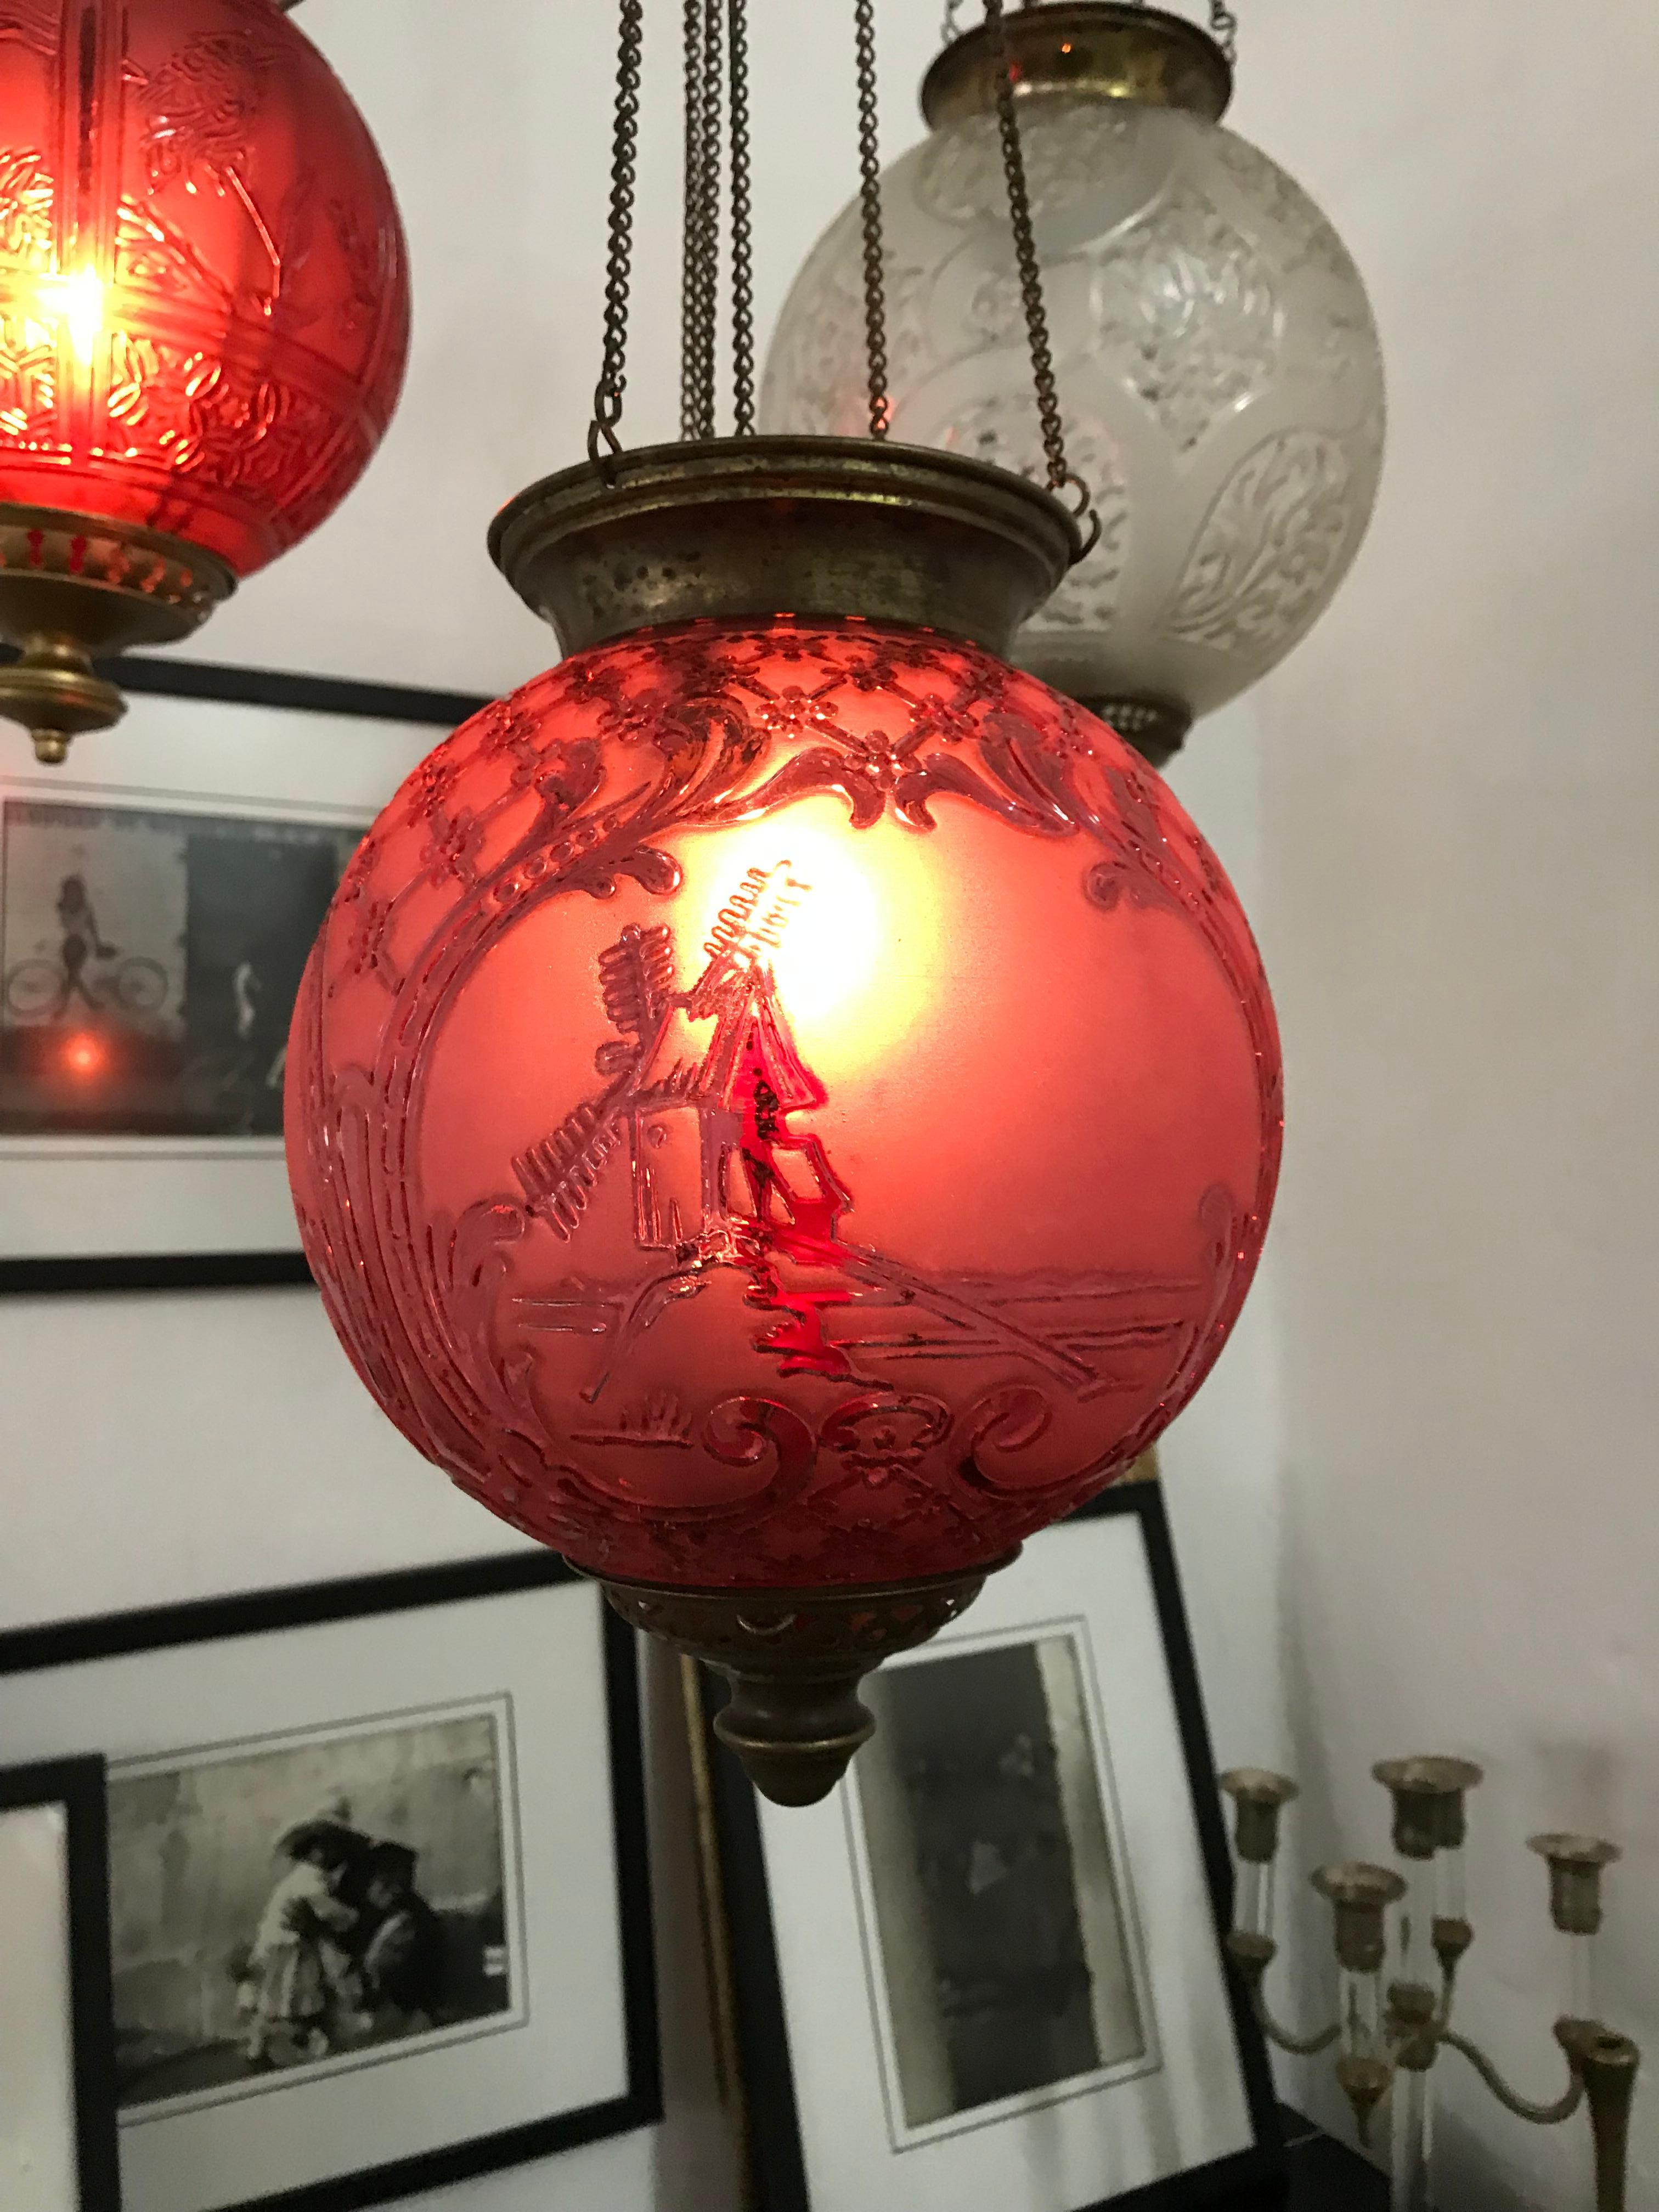 Late 19th or early 20th century ruby red glass Lantern by Baccarat France, unsigned but a well documented model.
It has 3 panels depicting a Windmill, a farmhouse and a Greek temple.
At the moment it can hold a candle (we recommend using Battery